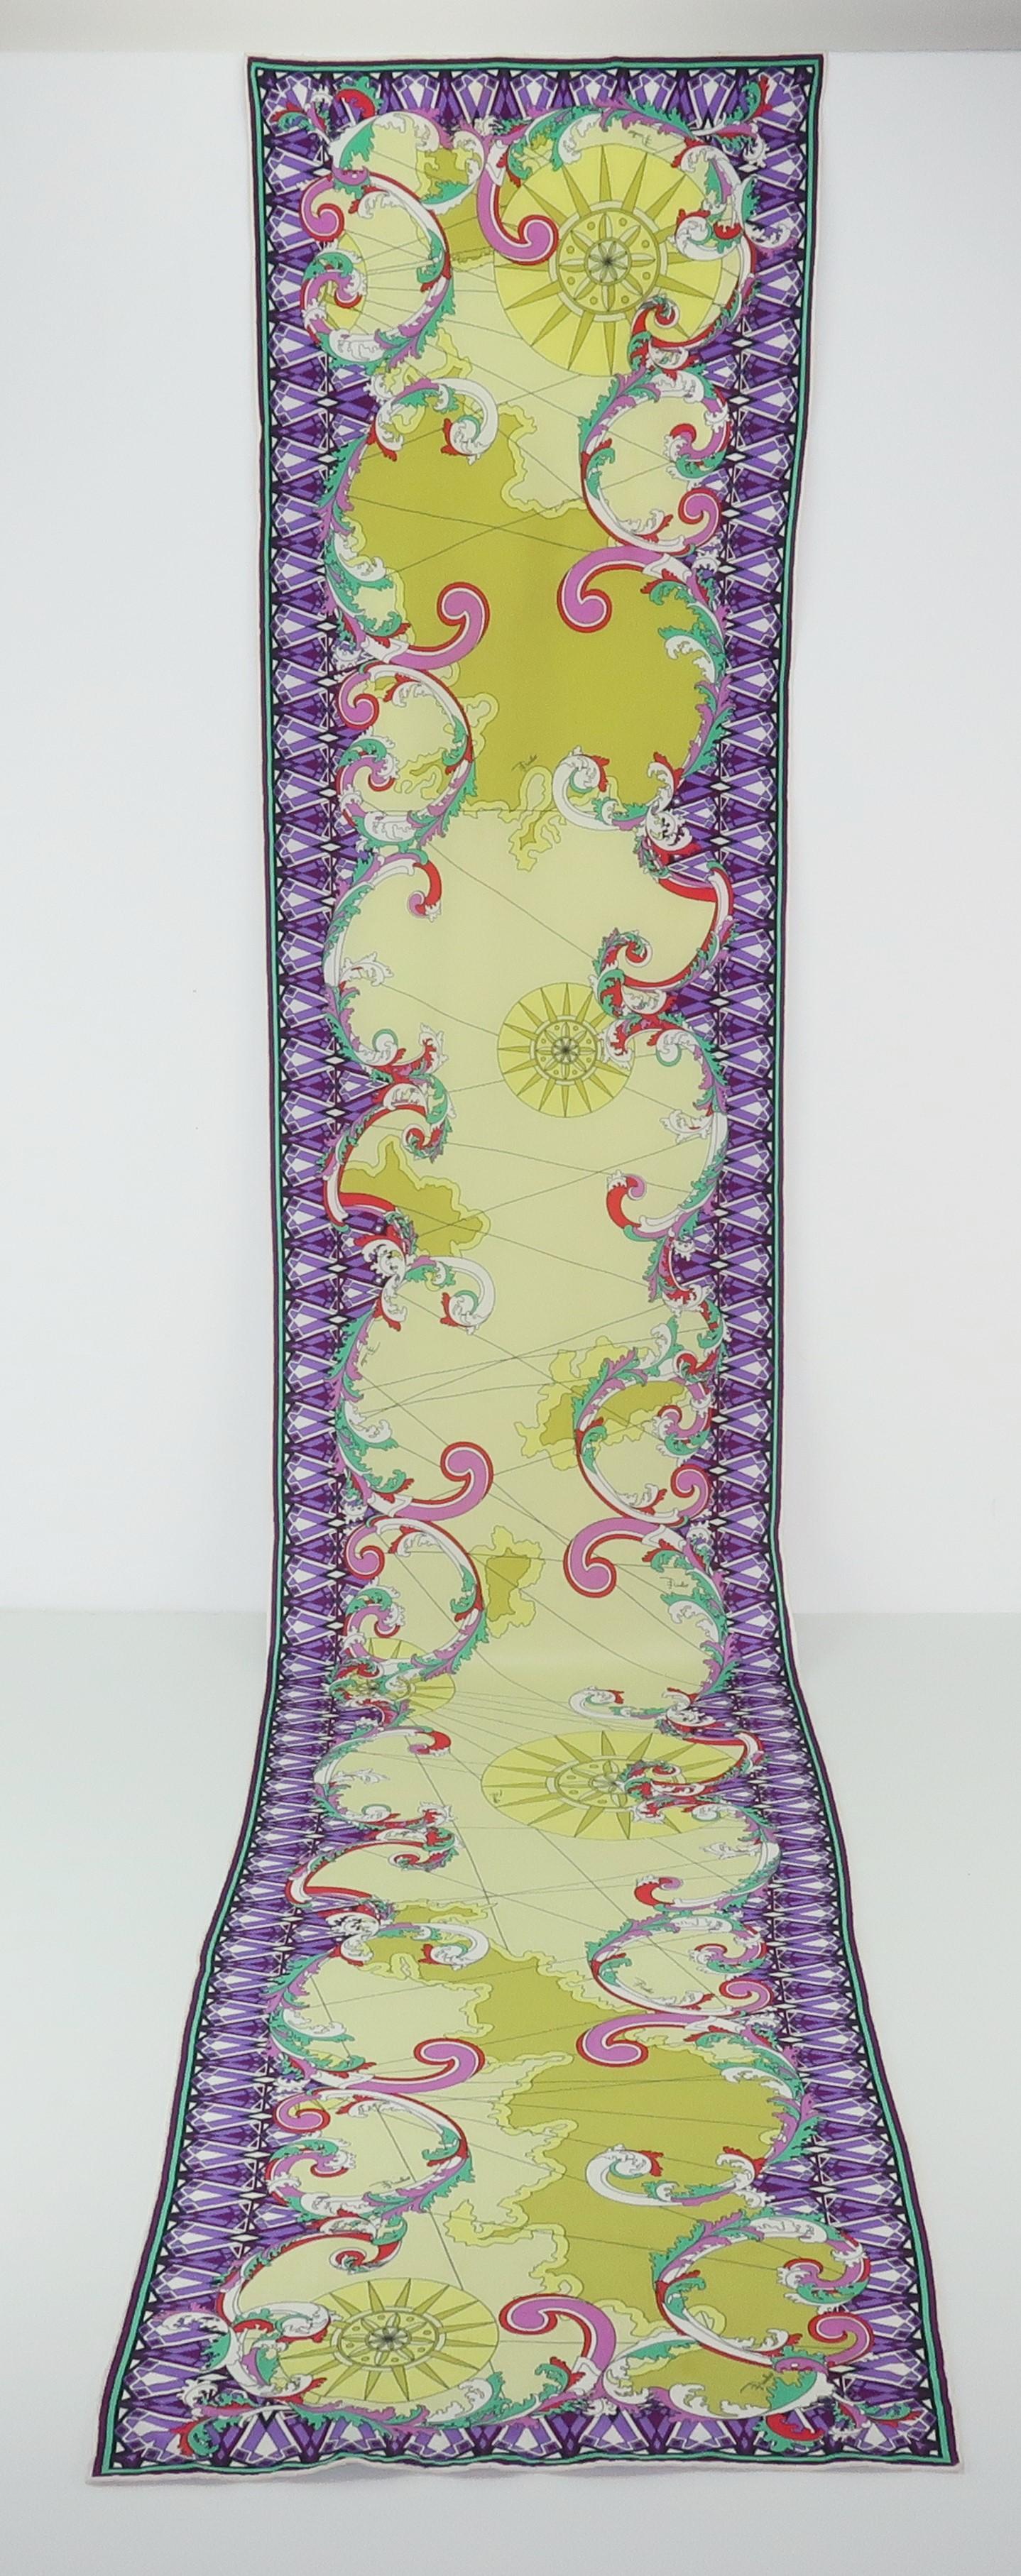 The combination of geometric patterns, fanciful swirls and a vibrant color palette makes this Emilio Pucci extra long silk scarf a go-to accessory for adding a visual punch to your wardrobe.  The purples, red, aqua, white, celery green and